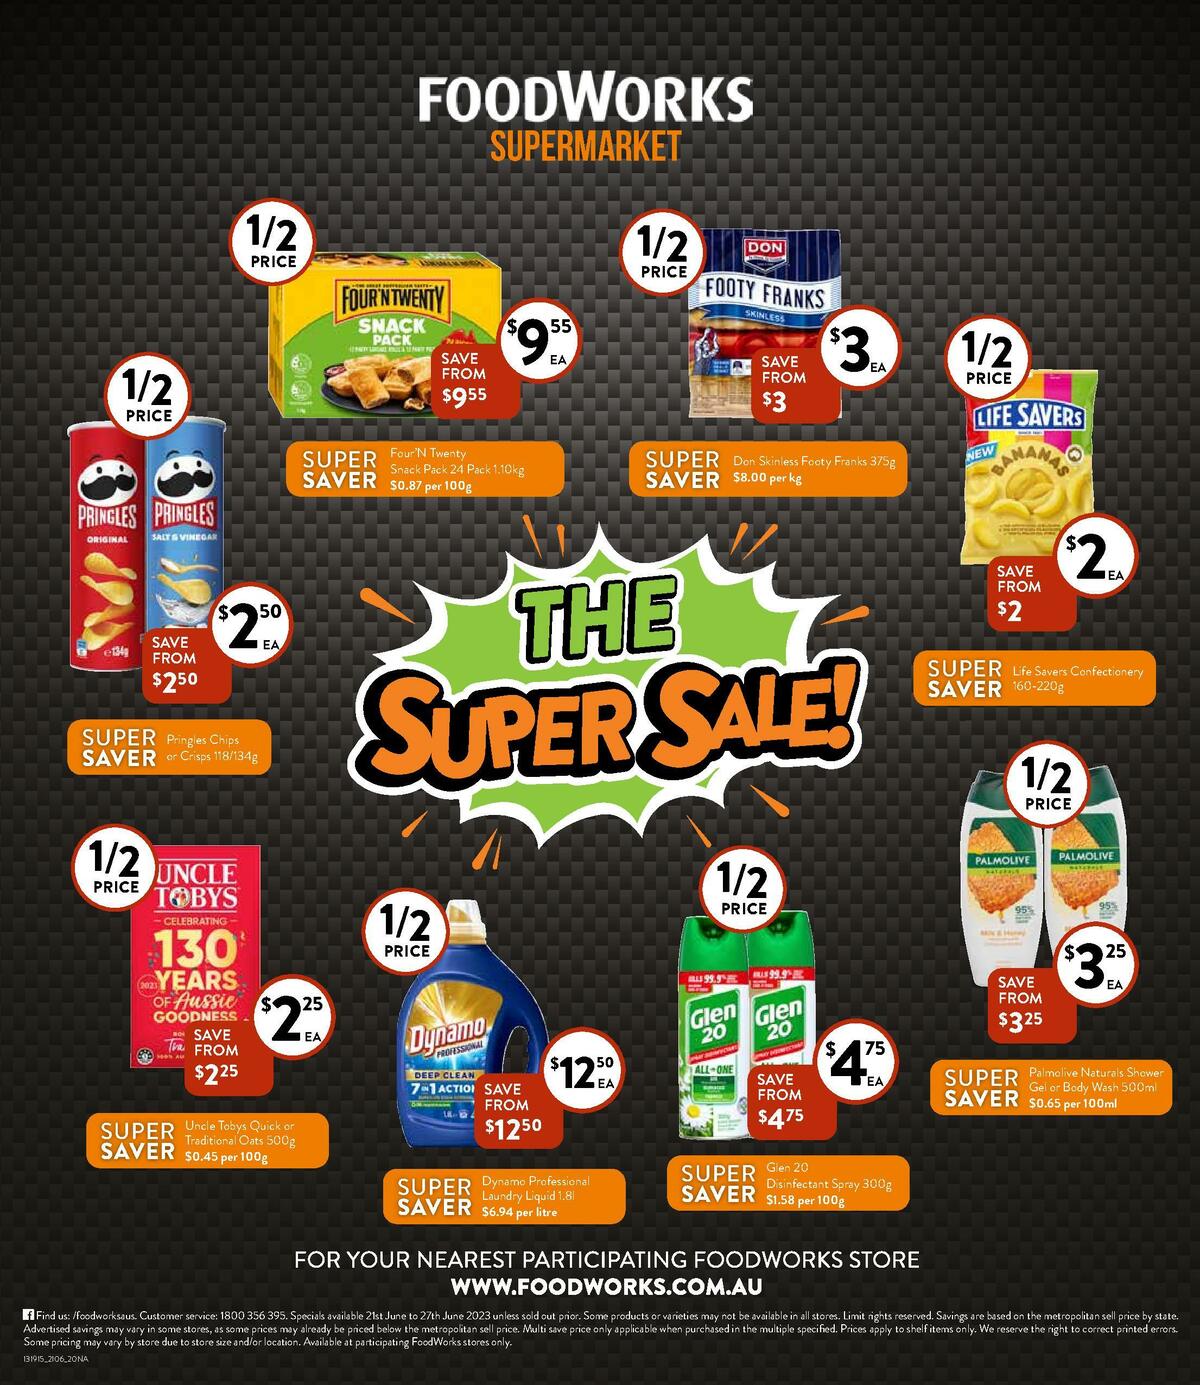 FoodWorks Supermarket Catalogues from 21 June